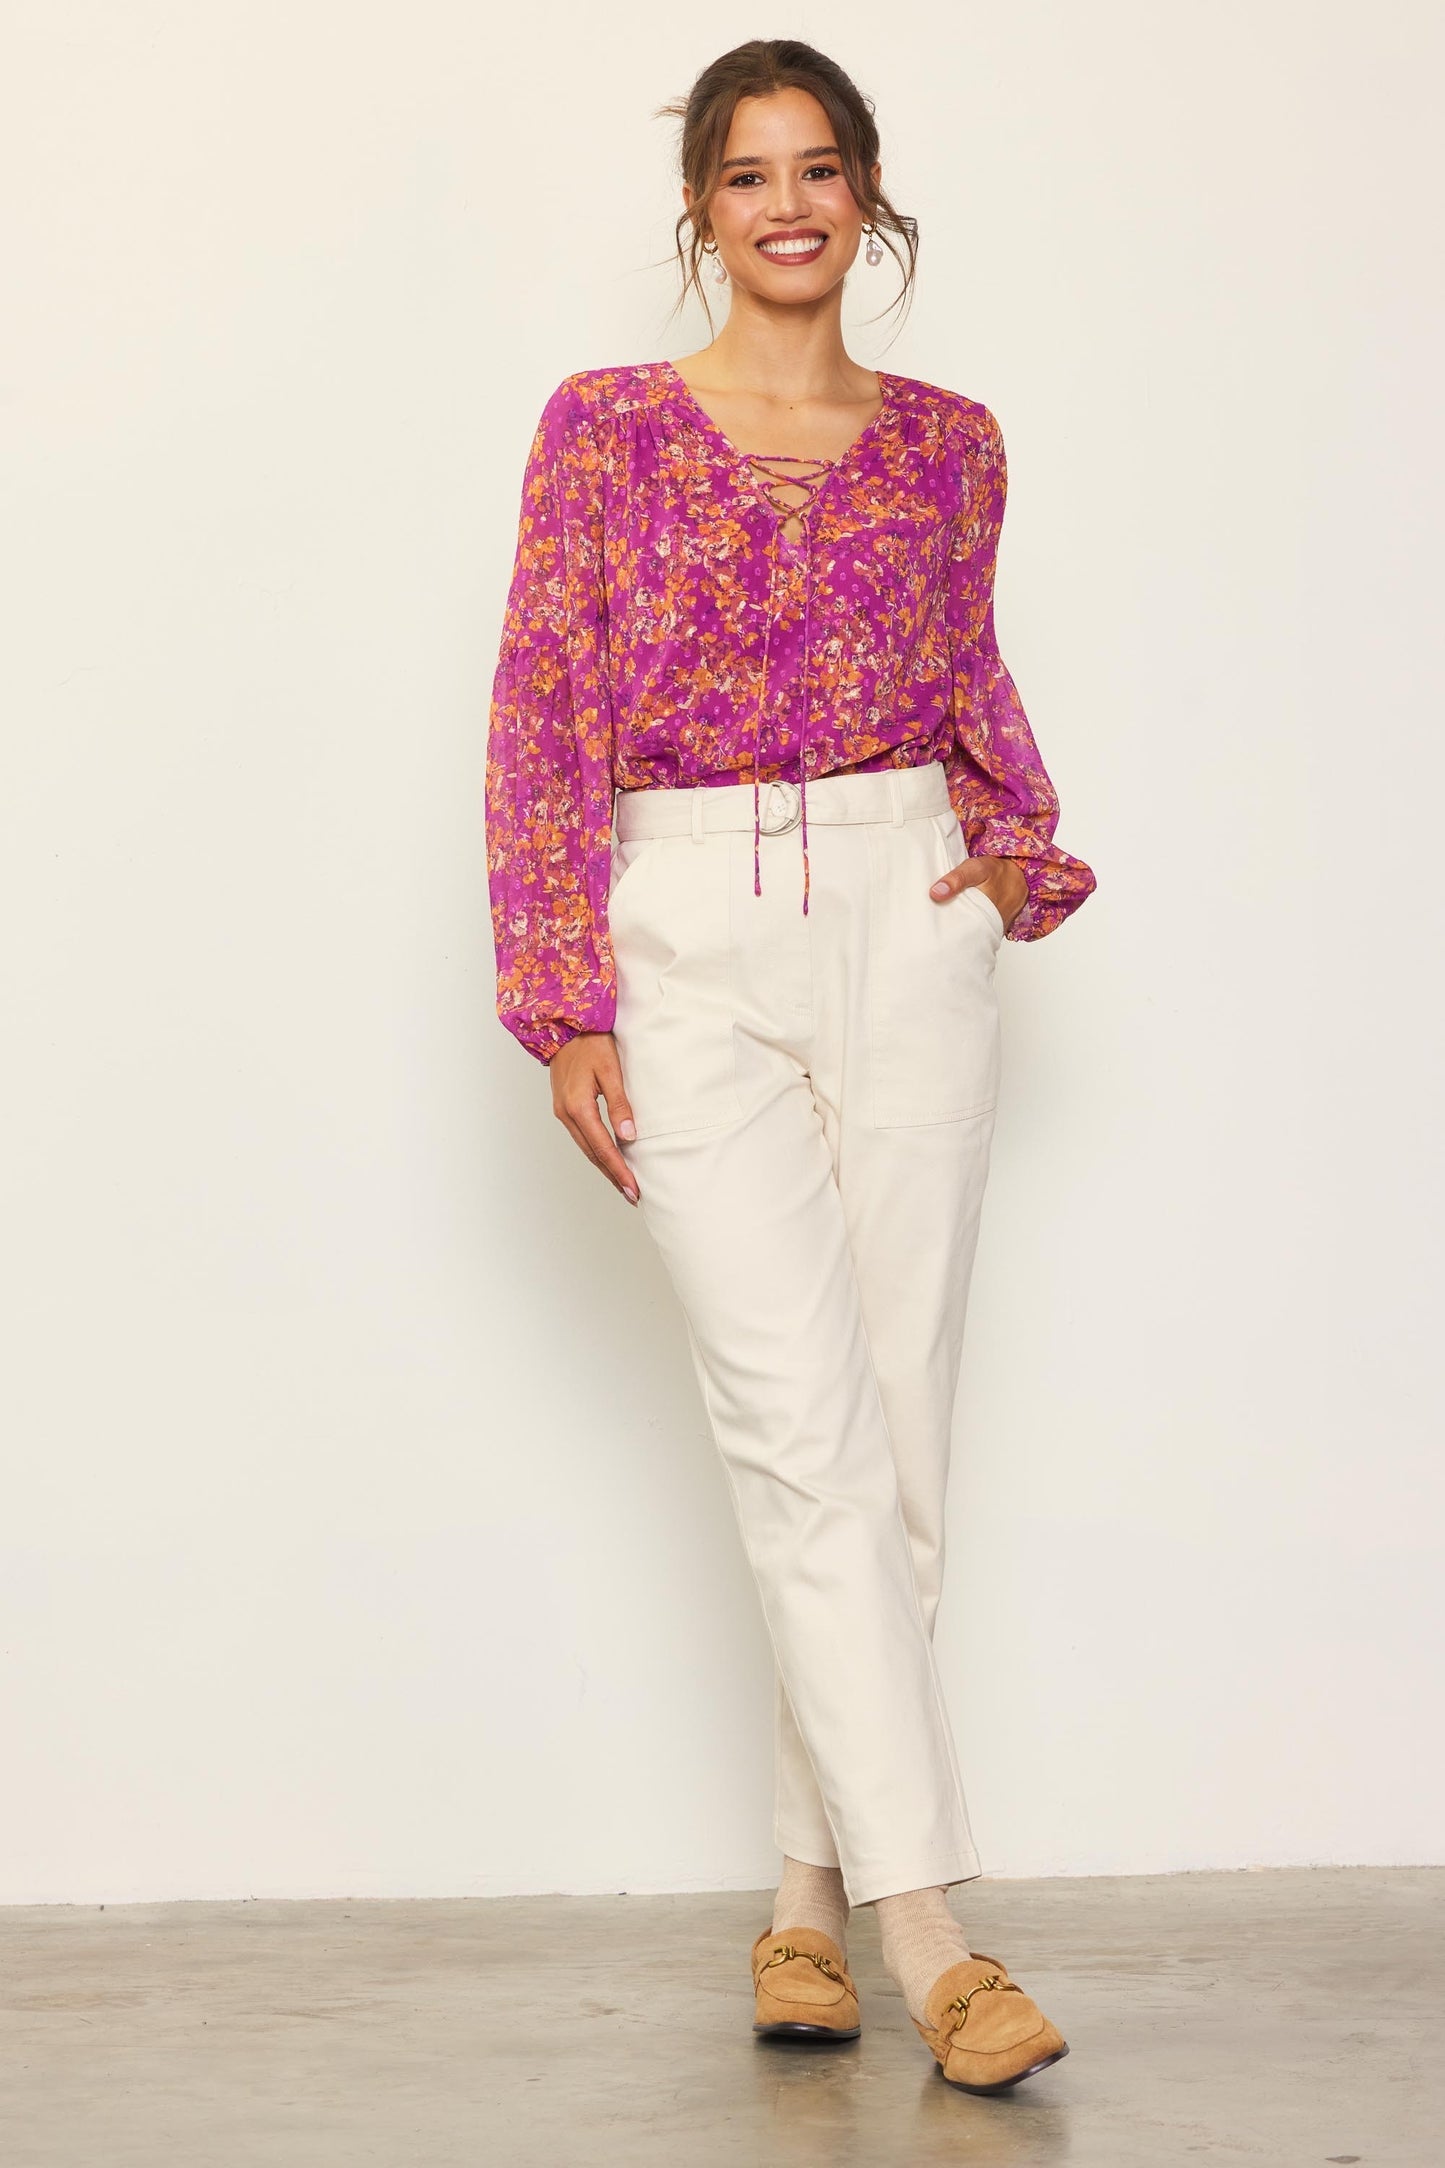 Romance Everywhere Orchid Top